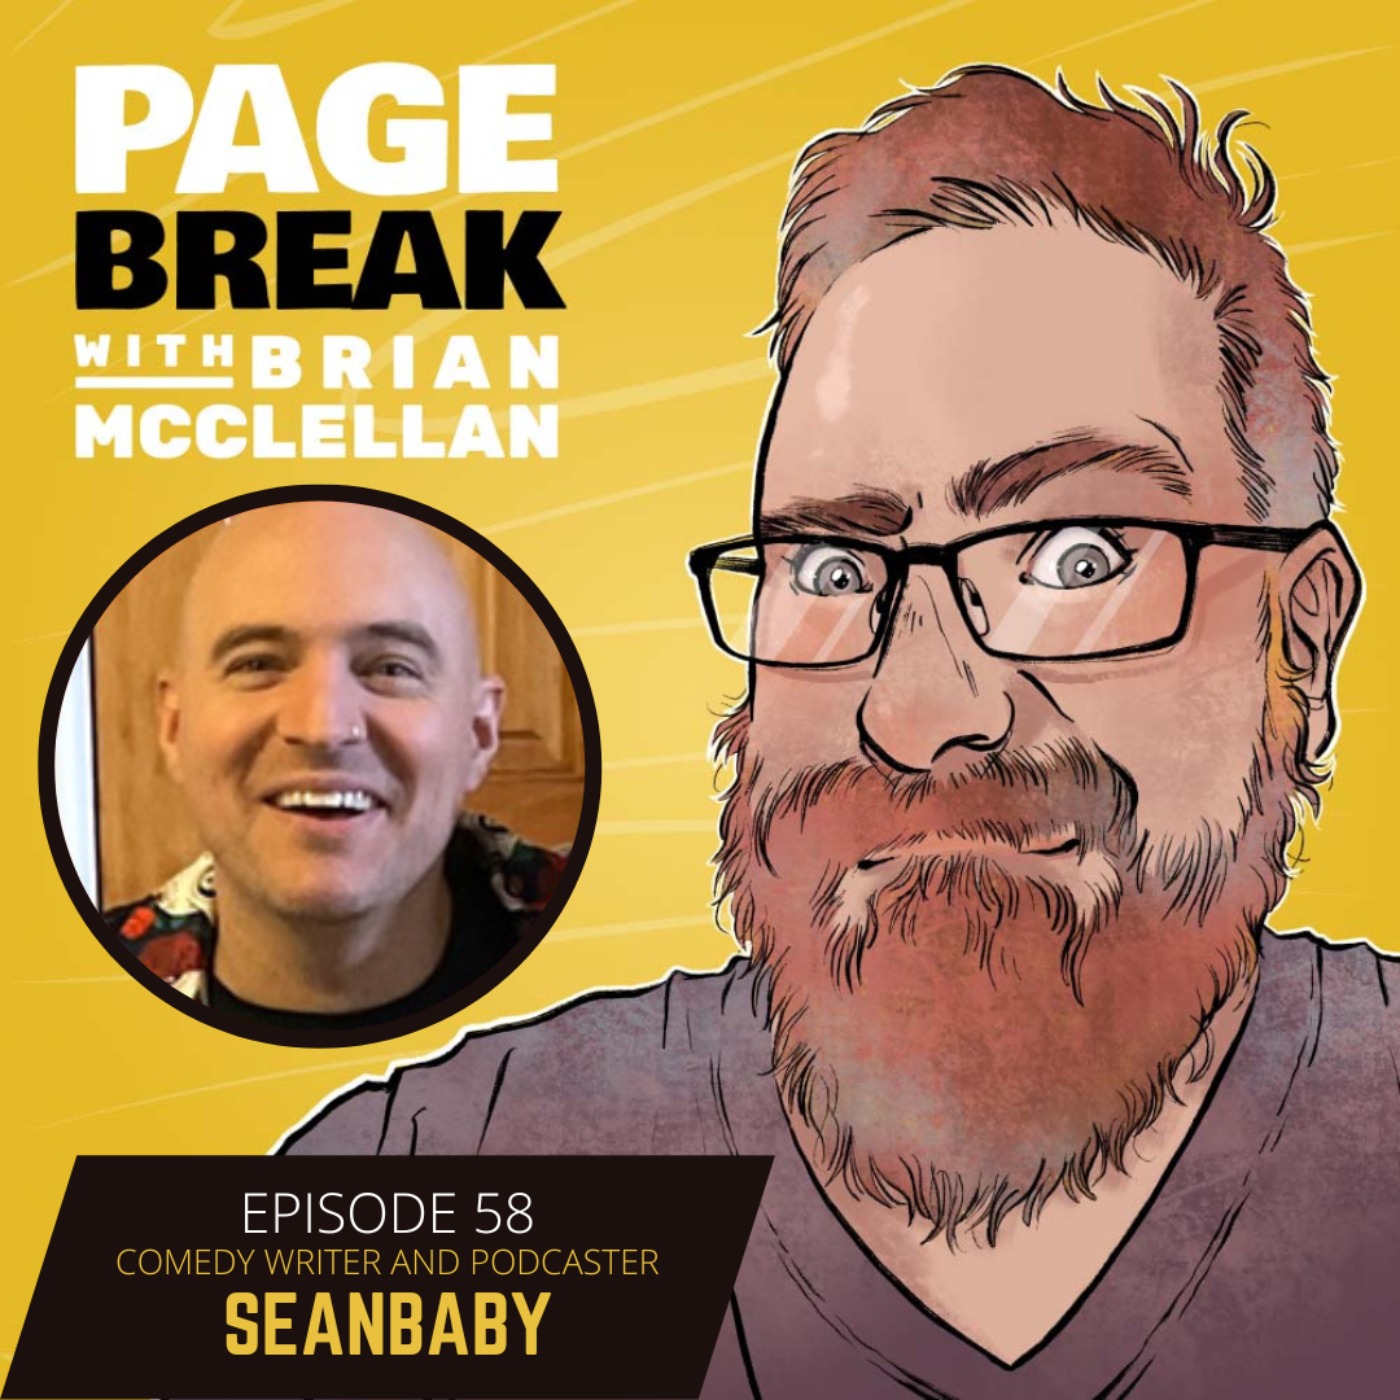 Ep 58 - Seanbaby - Comedy Writer and Podcaster